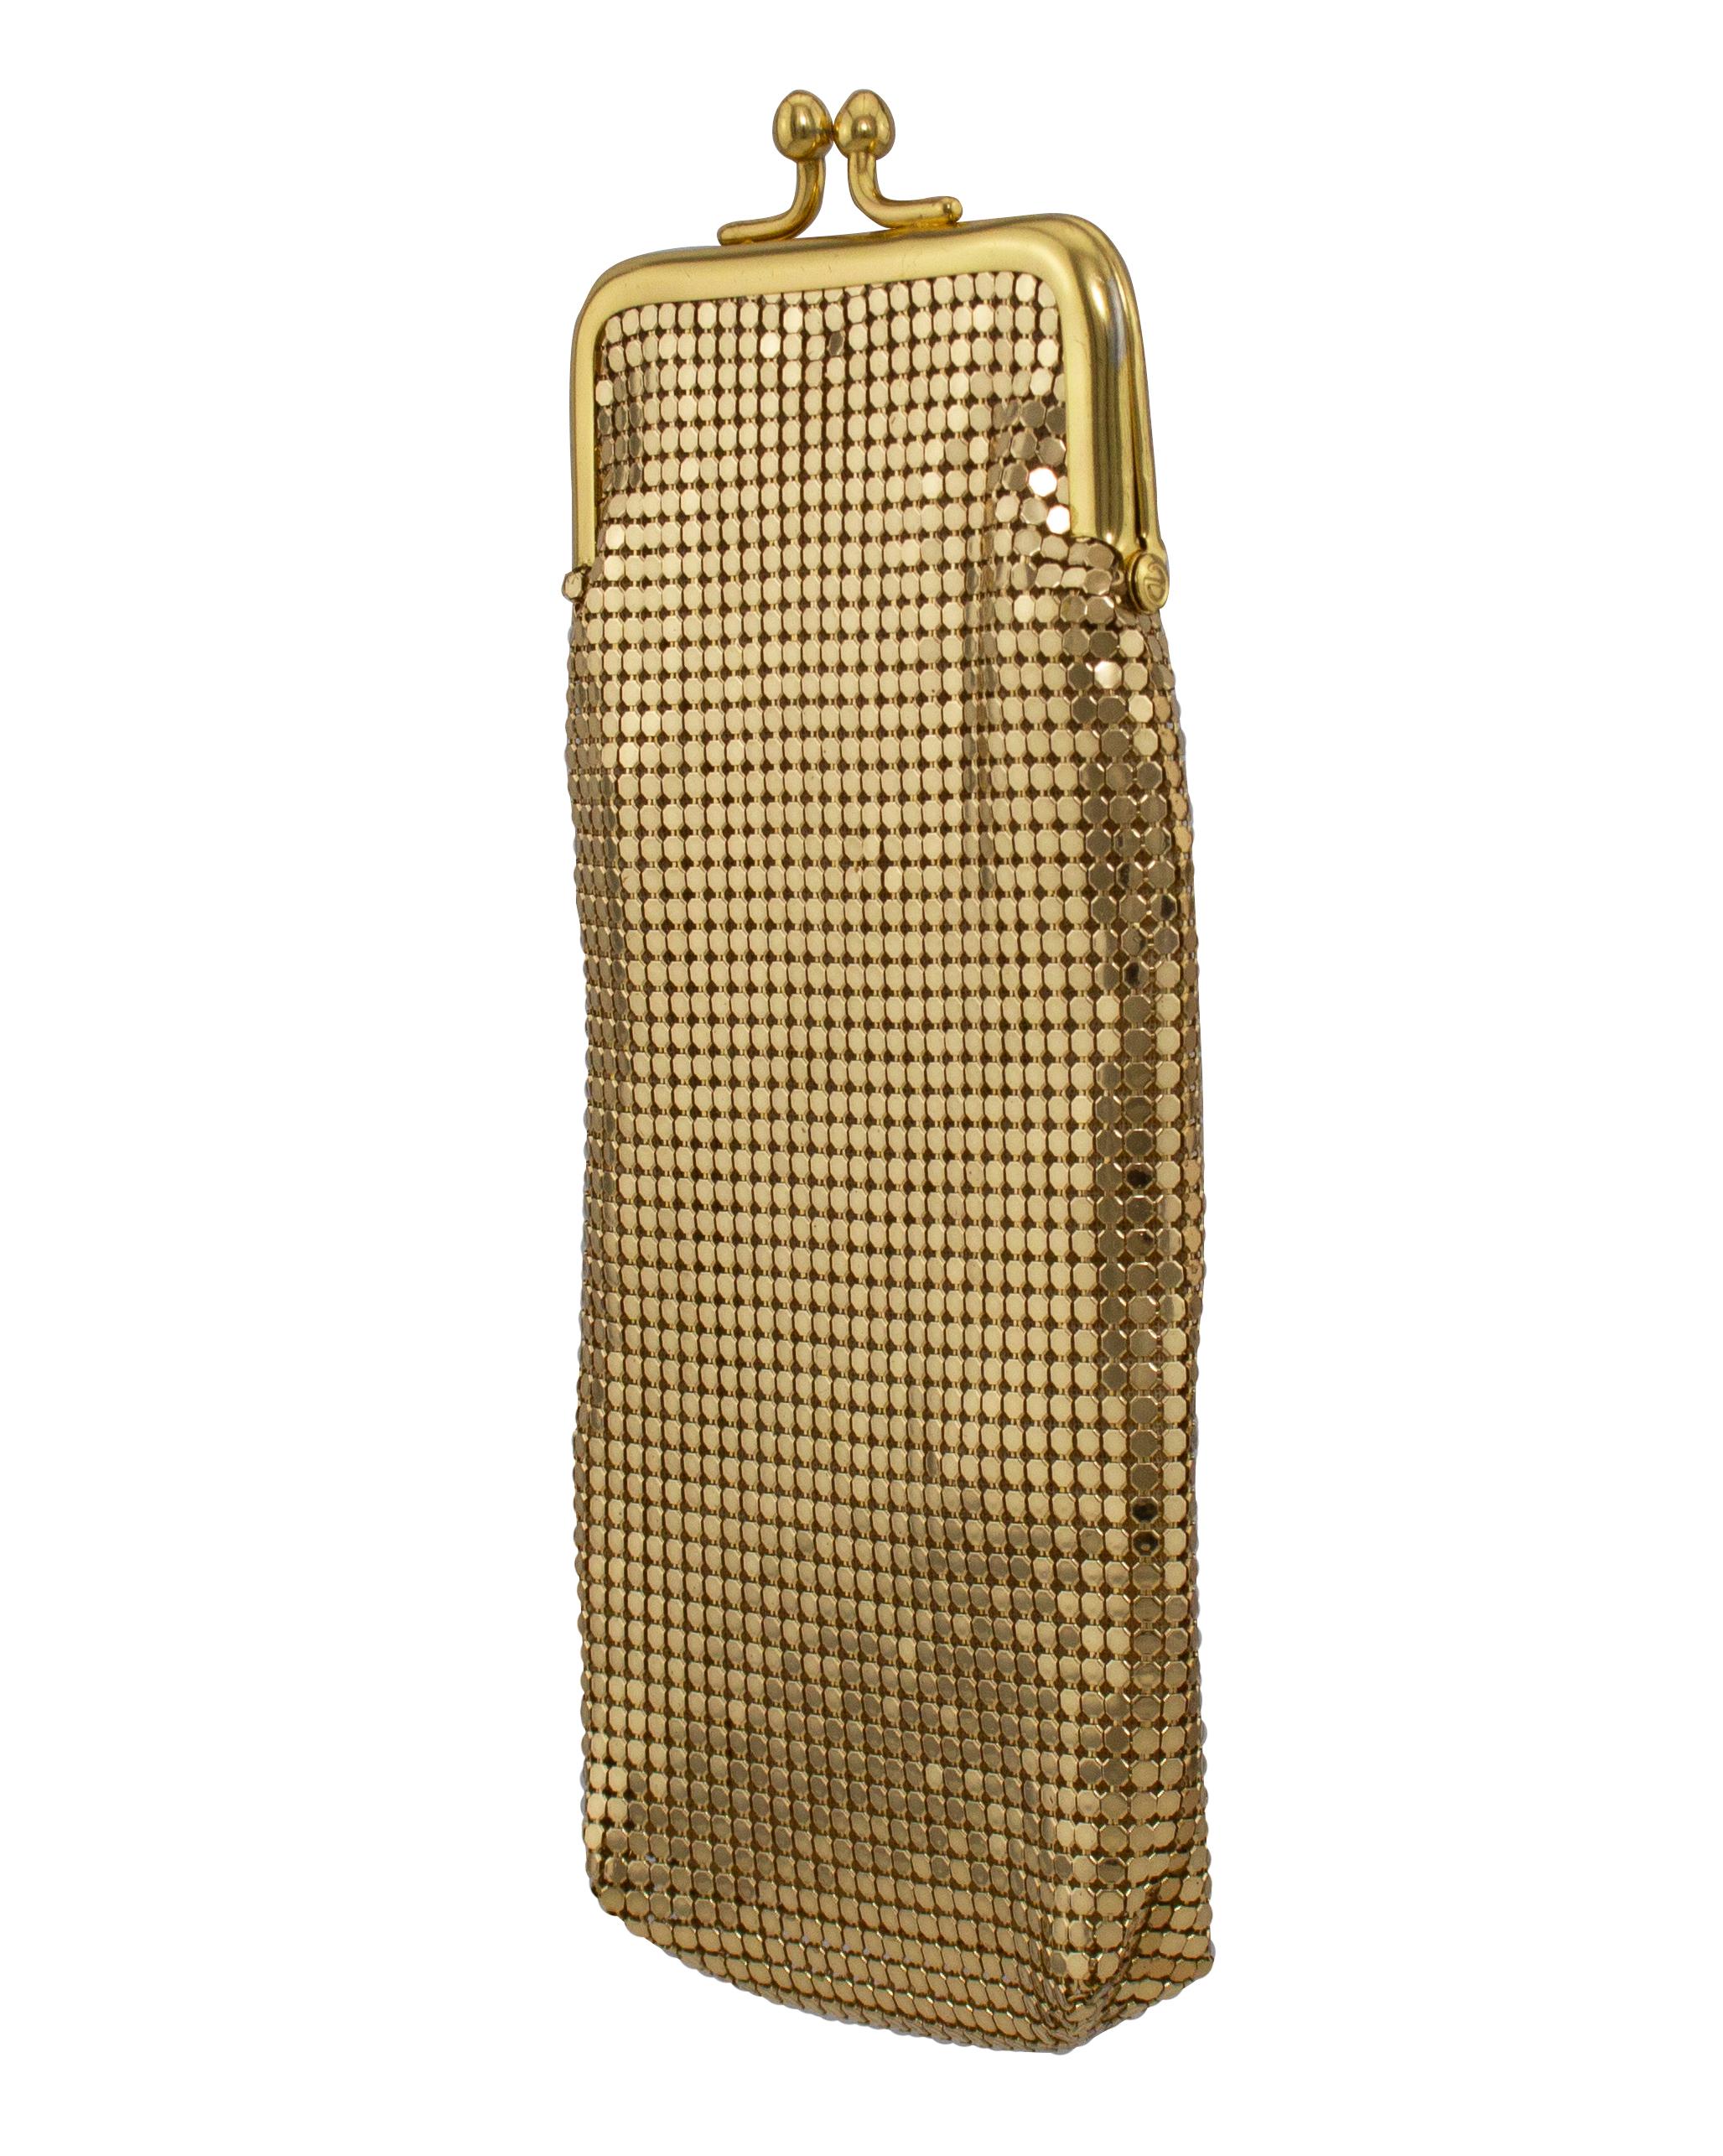 Fabulous Whiting and Davis gold metal mesh glasses case from the 1980s. Keep in your purse for your glasses or sunglasses. Kiss lock closure. Branded lining. Excellent vintage condition. 7.25